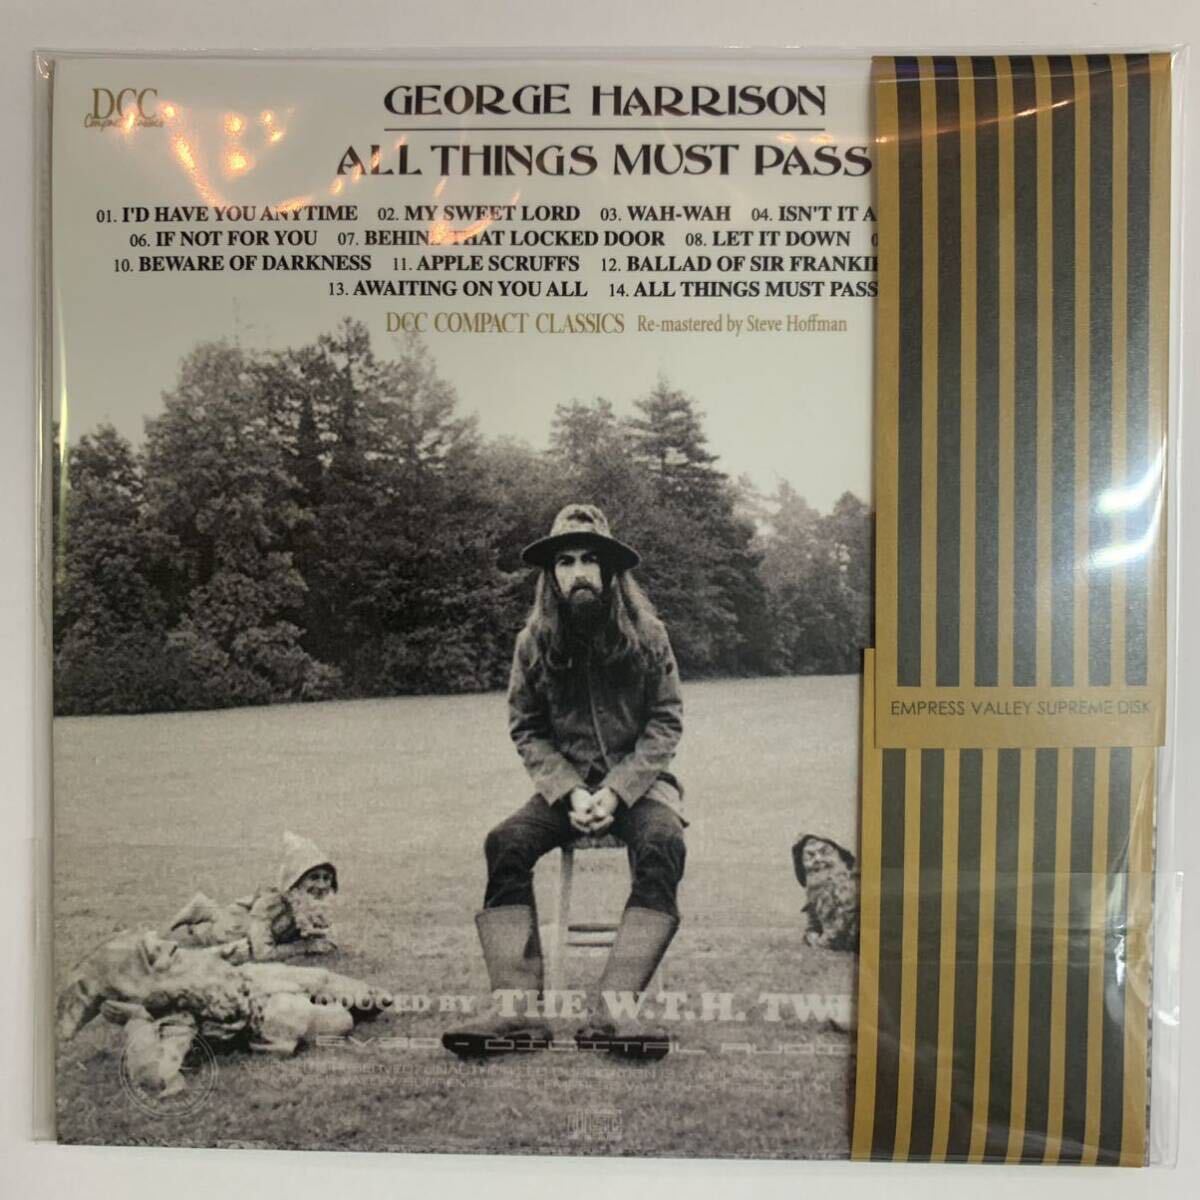 GEORGE HARRISON / ALL THINGS MUST PASS DCC COMPACT CLASSICS Remastered by Steve Hoffman (CD) これは嬉しい紙ジャケット仕様★_画像3